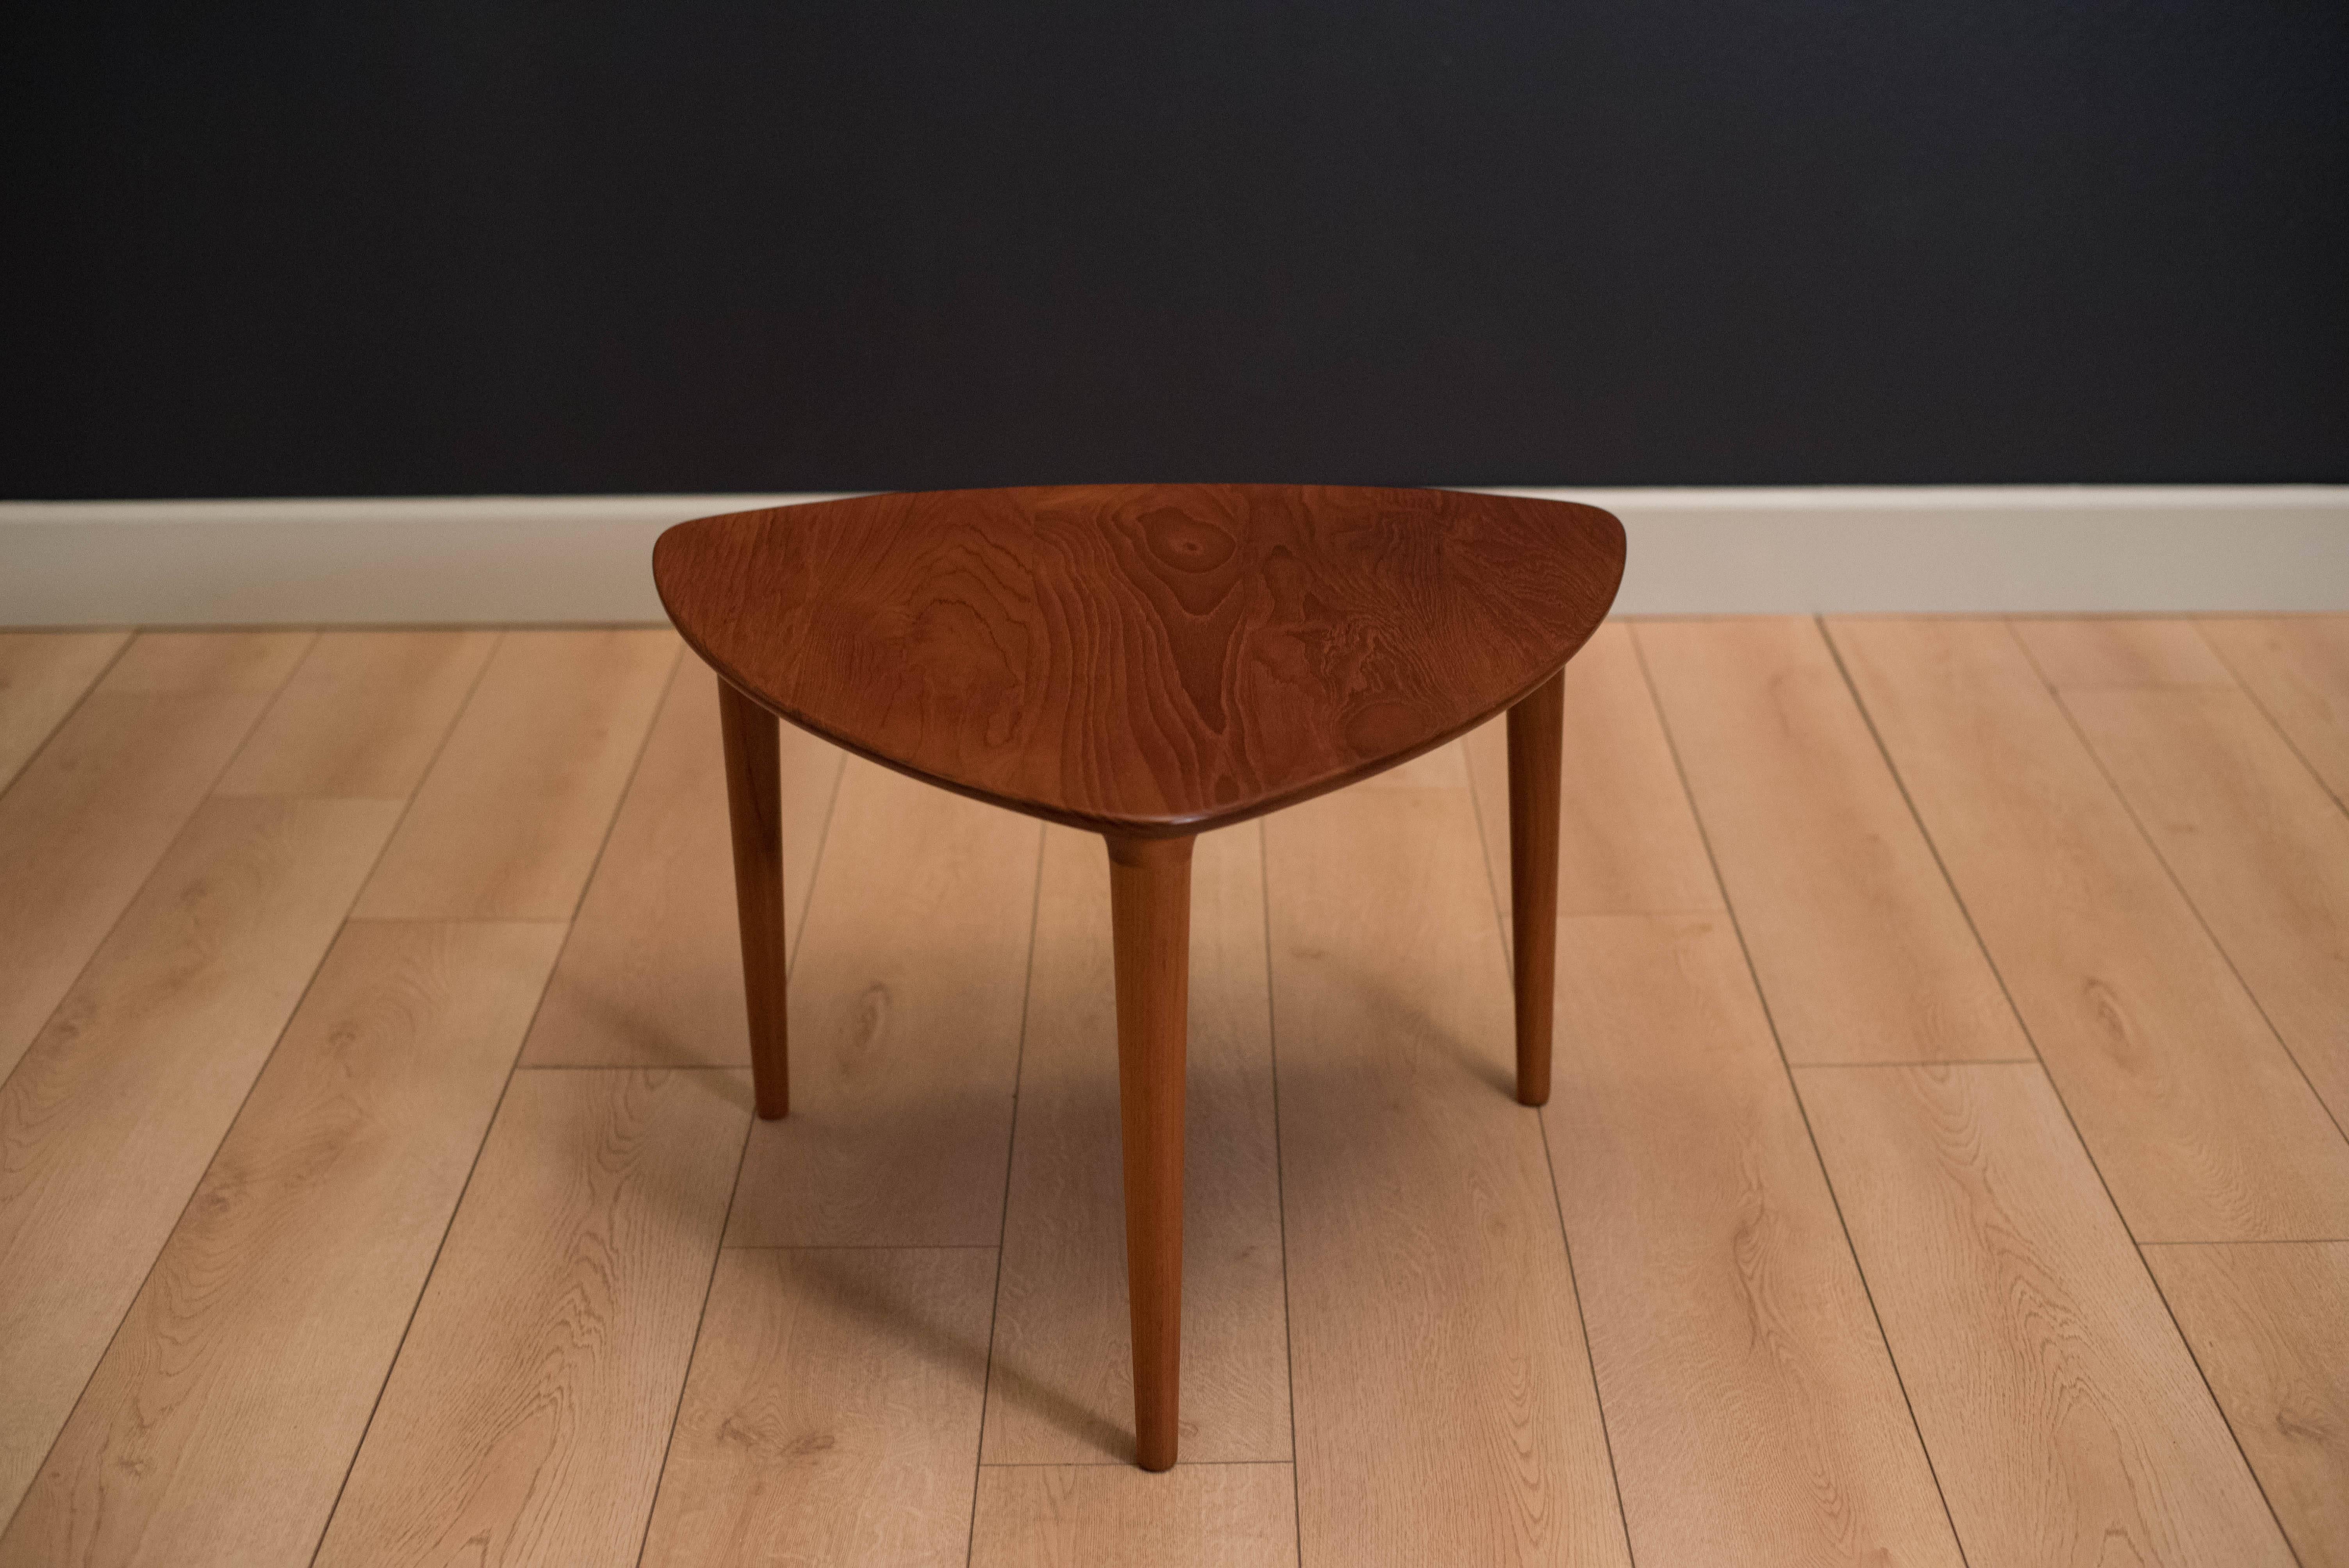 Mid-Century Modern side table manufactured by Gustav Bahus, Norway. This side table is made of solid teak and has a unique triangular guitar pick top with sculpted solid legs.